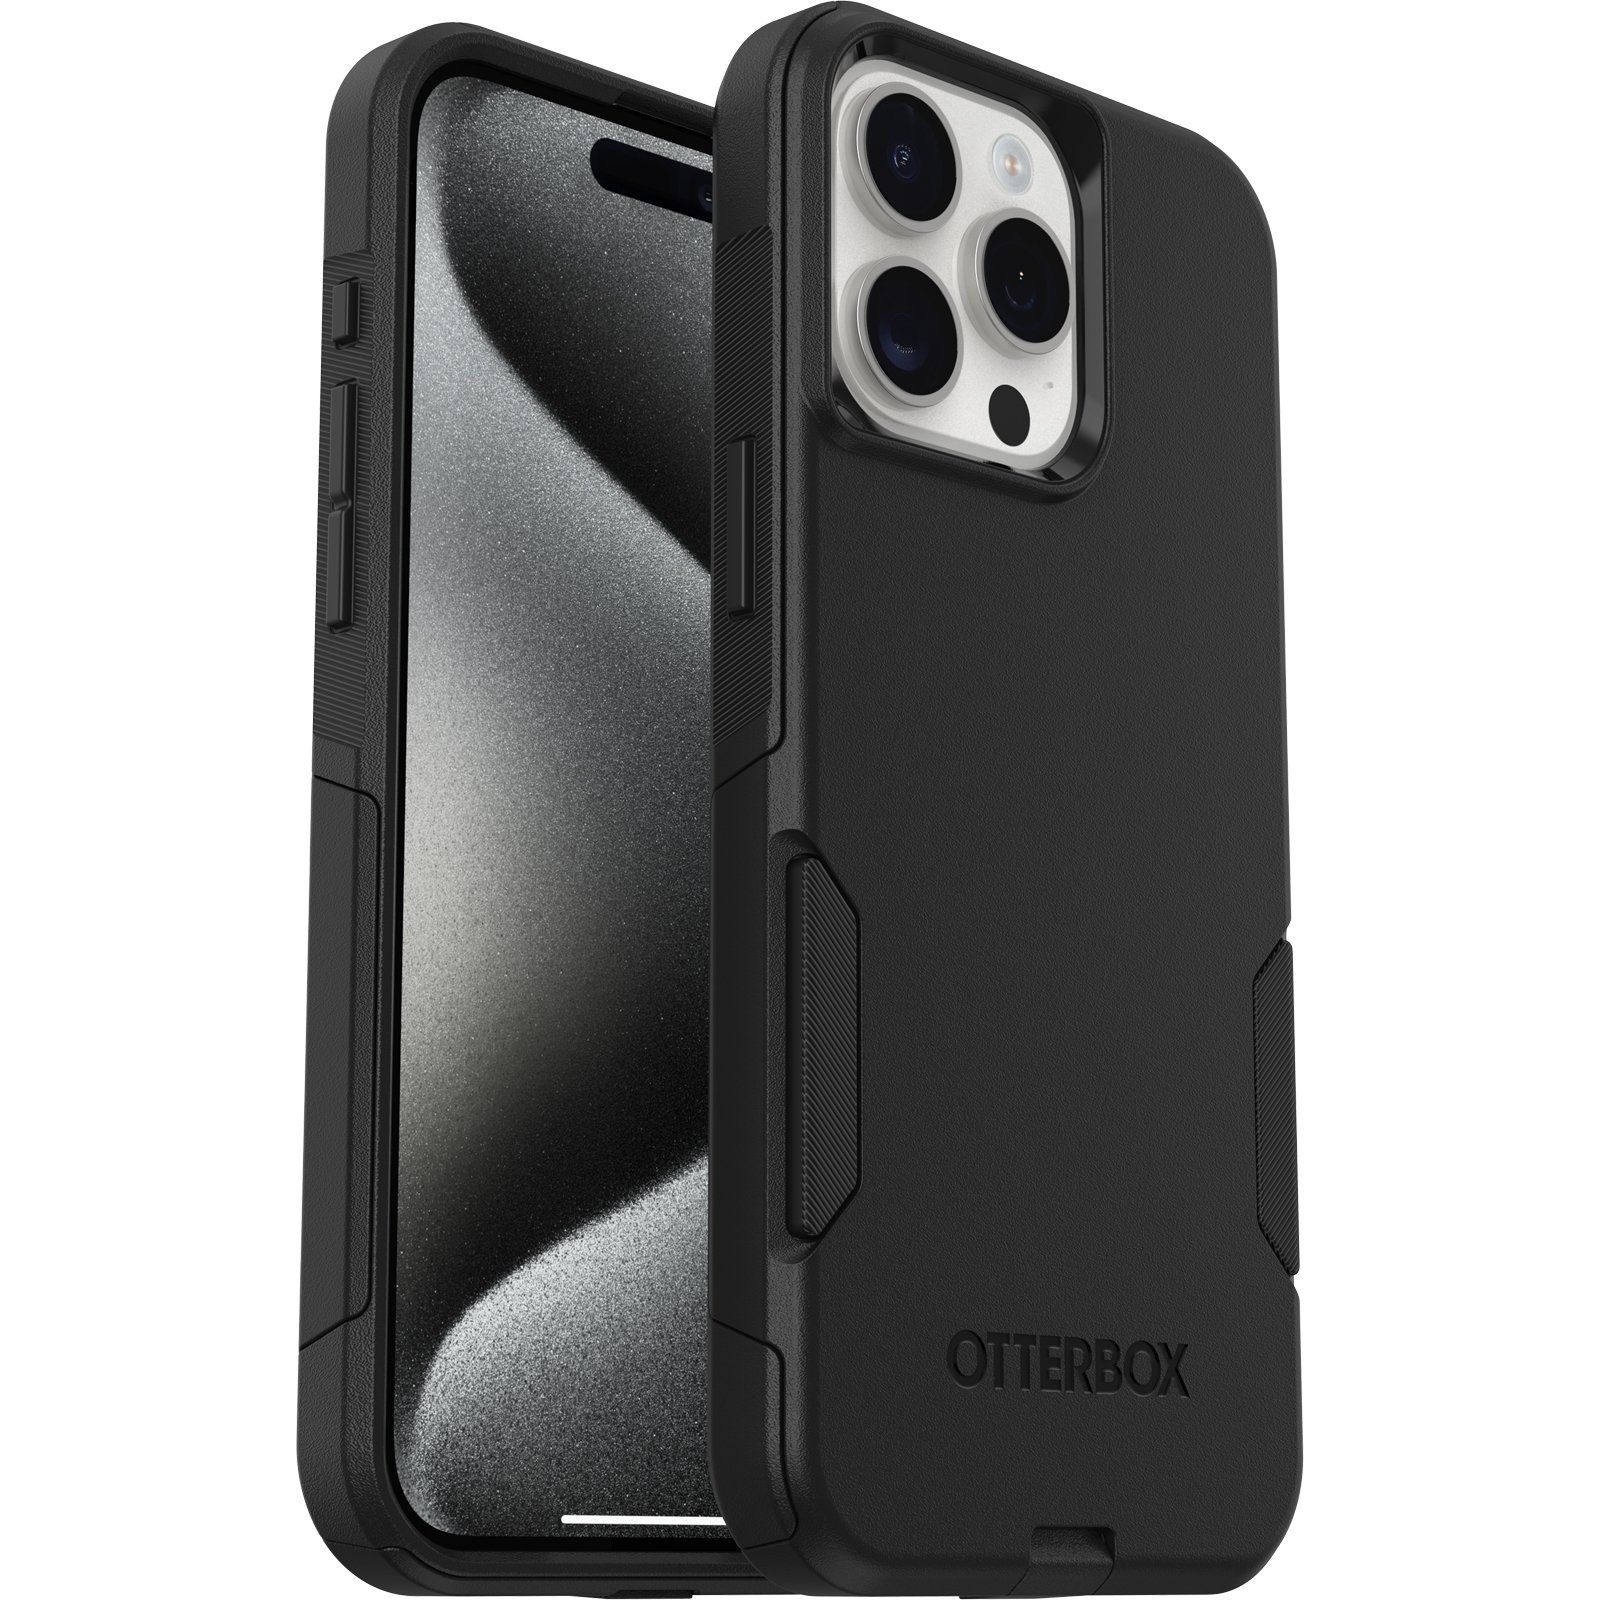 OtterBox tumblers and accessories now starting from $15 (Up to 25